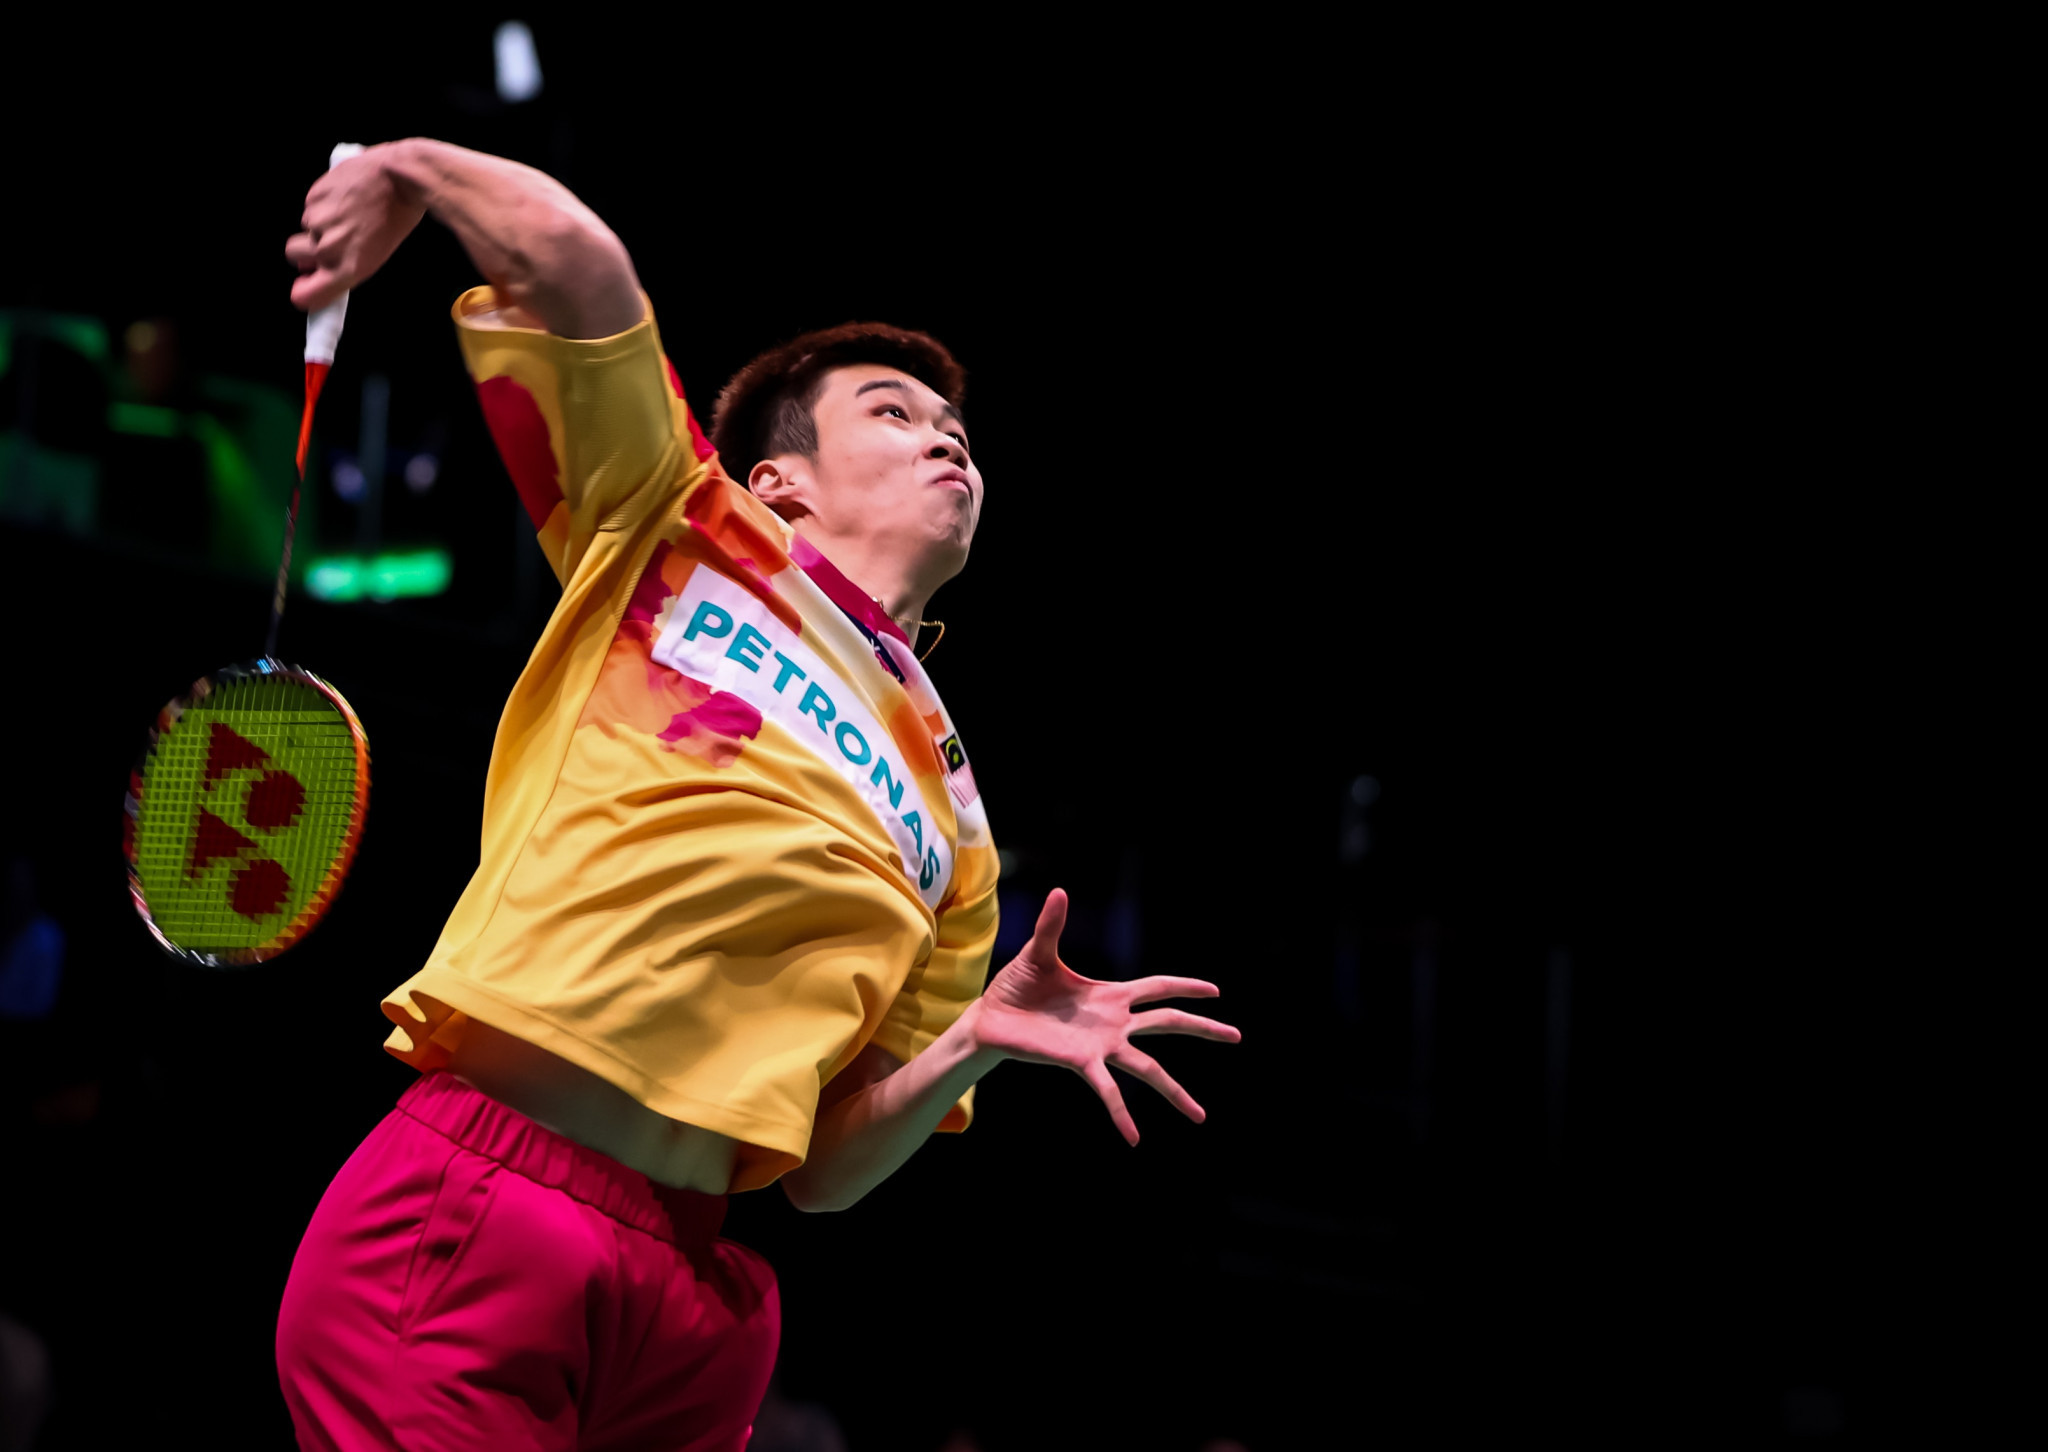 Malaysia's Ng Tze Yong lets fly with a smash against China's Zhao Jun Peng ©Badmintonphoto